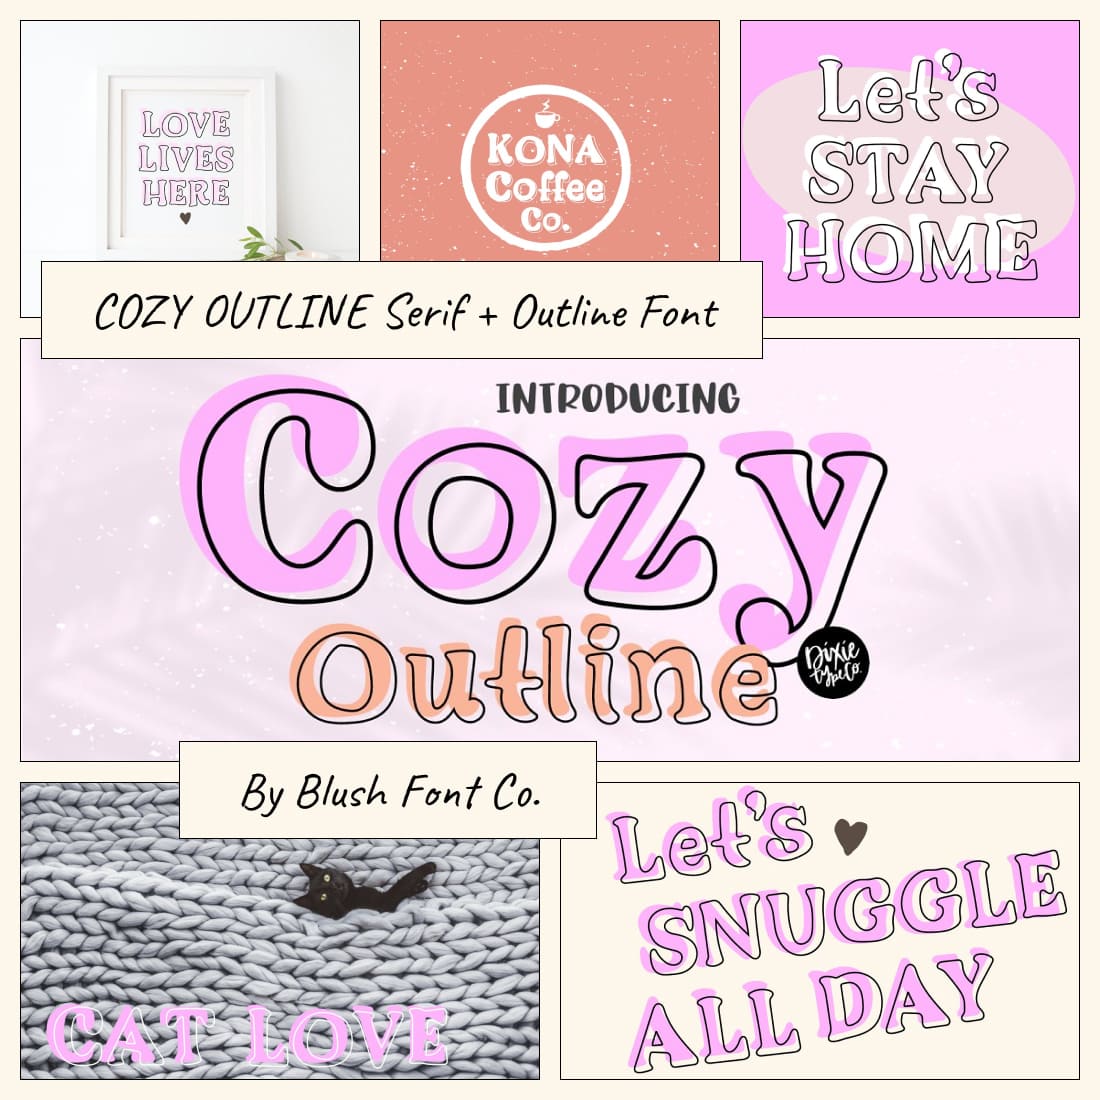 Introducing Cozy Outline -